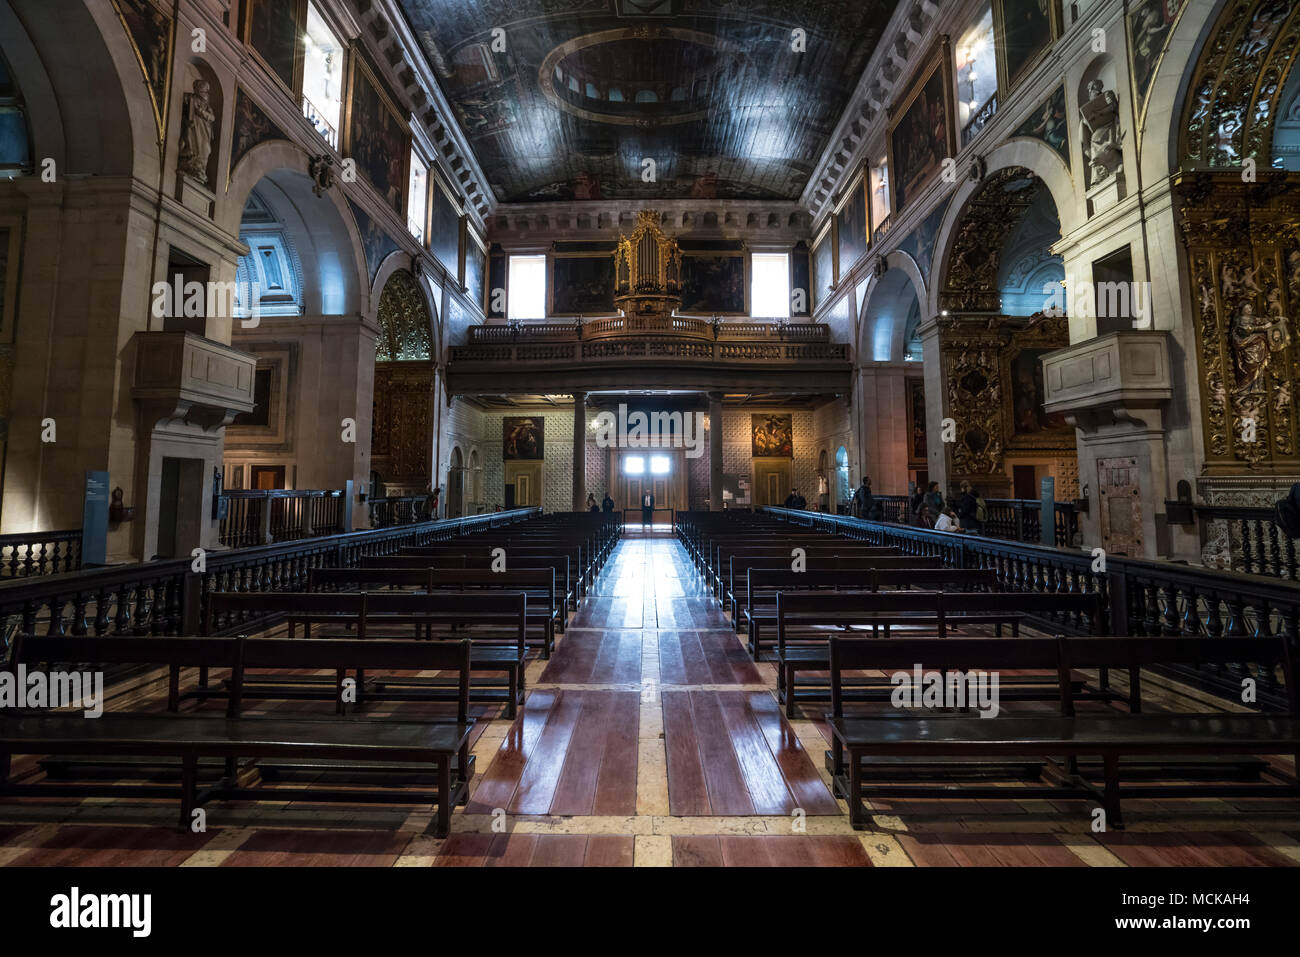 a view of the interior of the Sao Roque church in Lisbon, Portugal Stock Photo